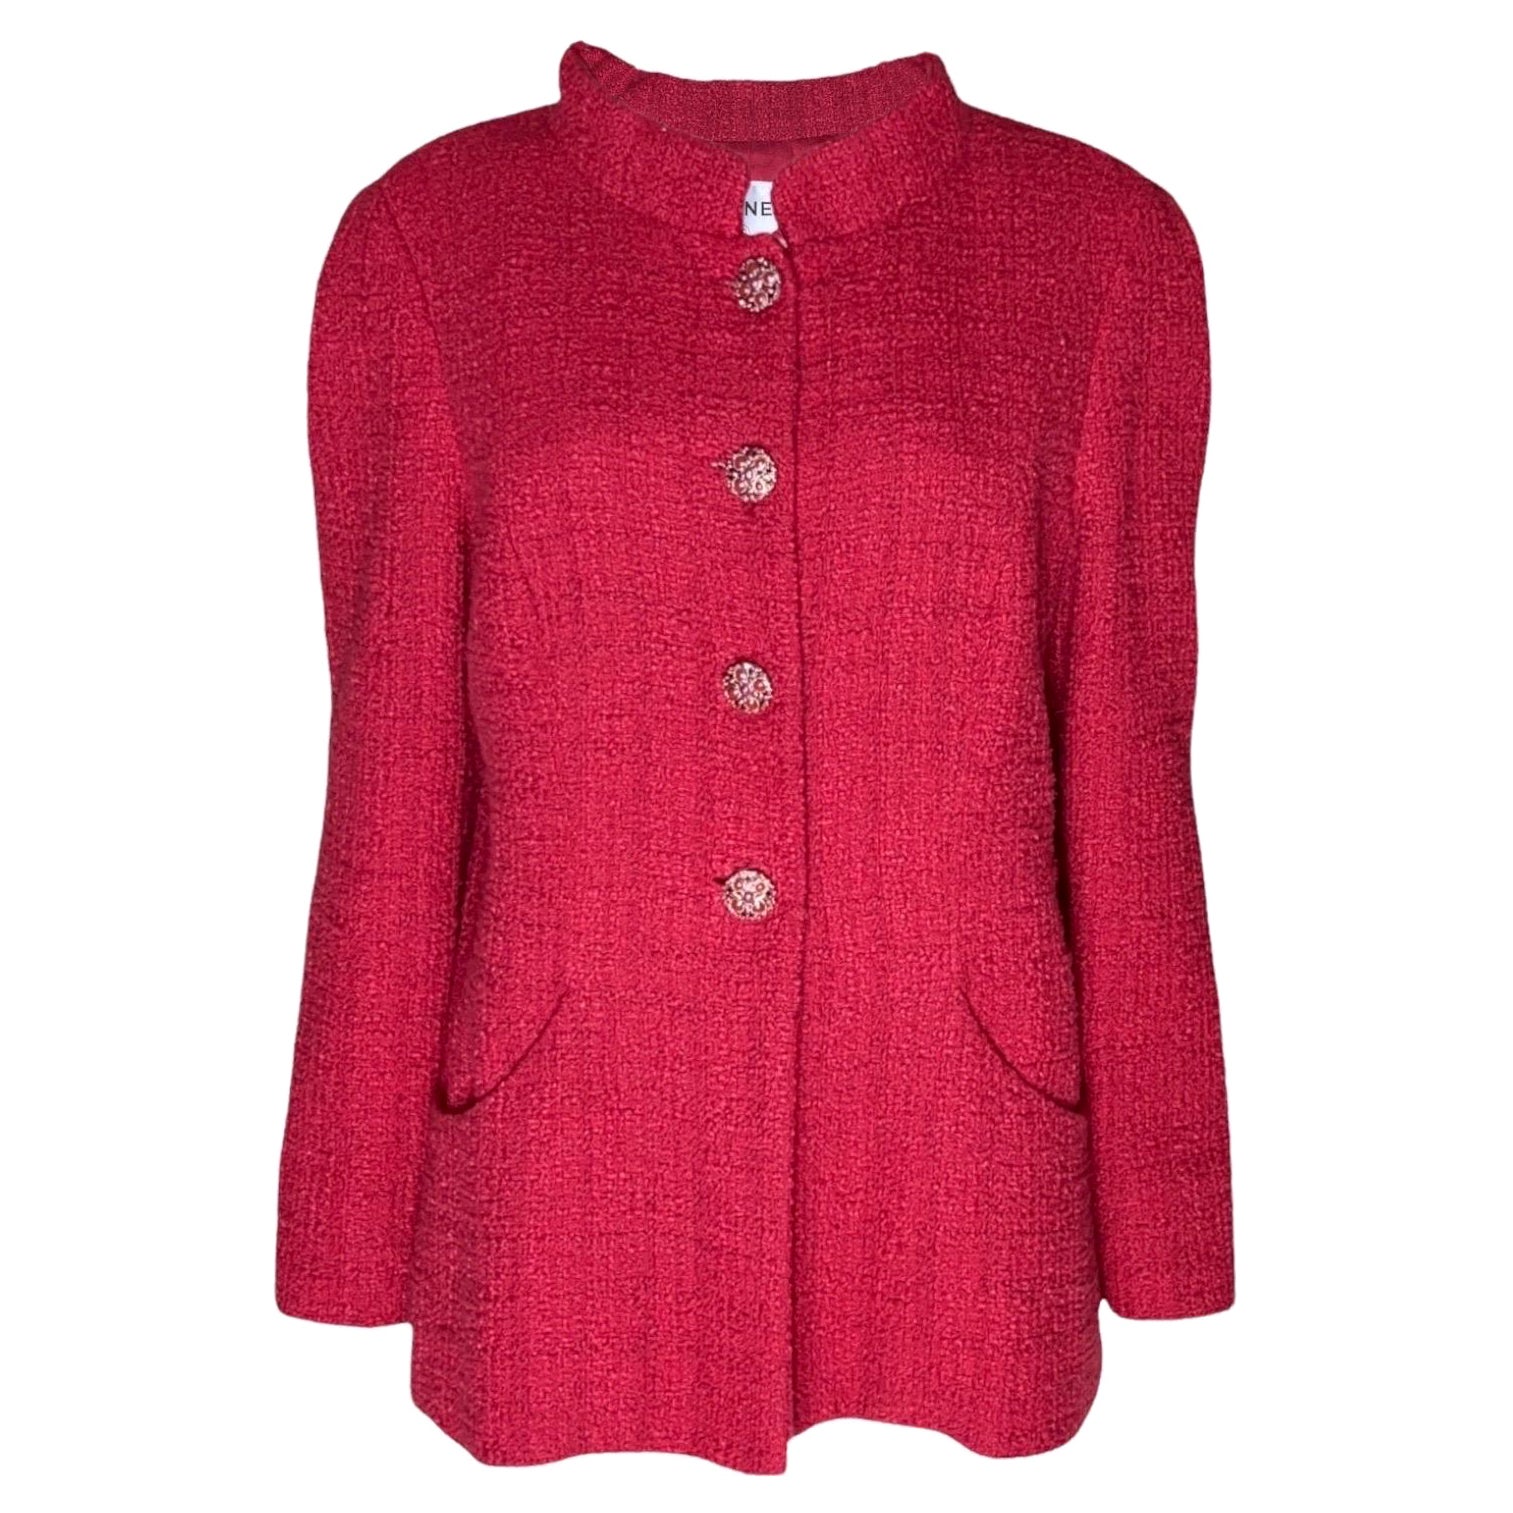 Gorgeous CHANEL Métiers d'Art Red Tweed Jacket Blazer Bombay Collection L